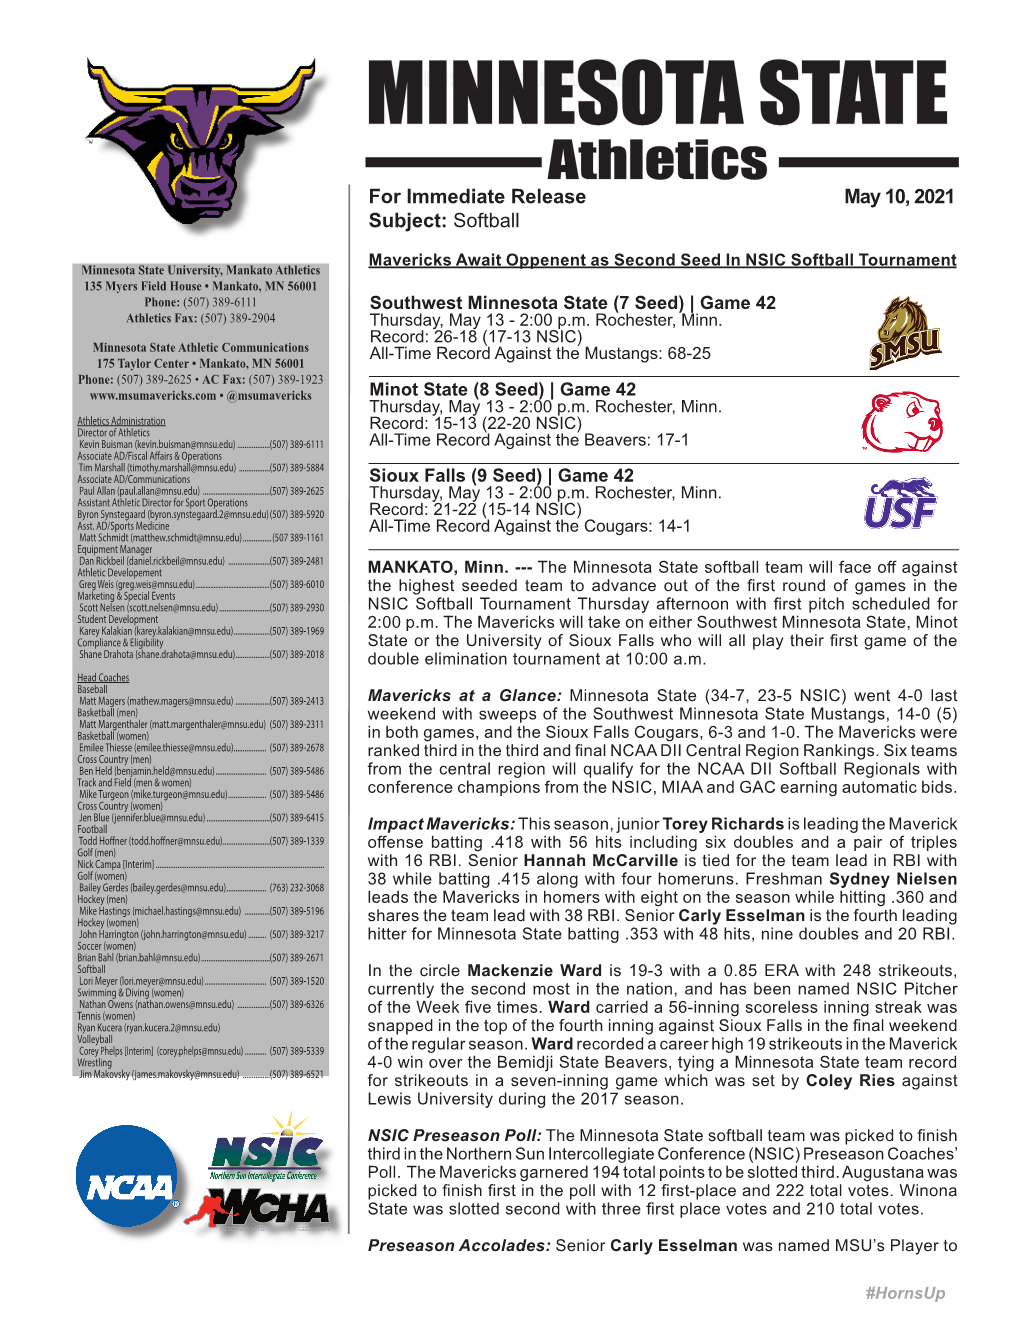 Minnesota State Softball STATE Athletics for Immediate Release May 10, 2021 Subject: Softball